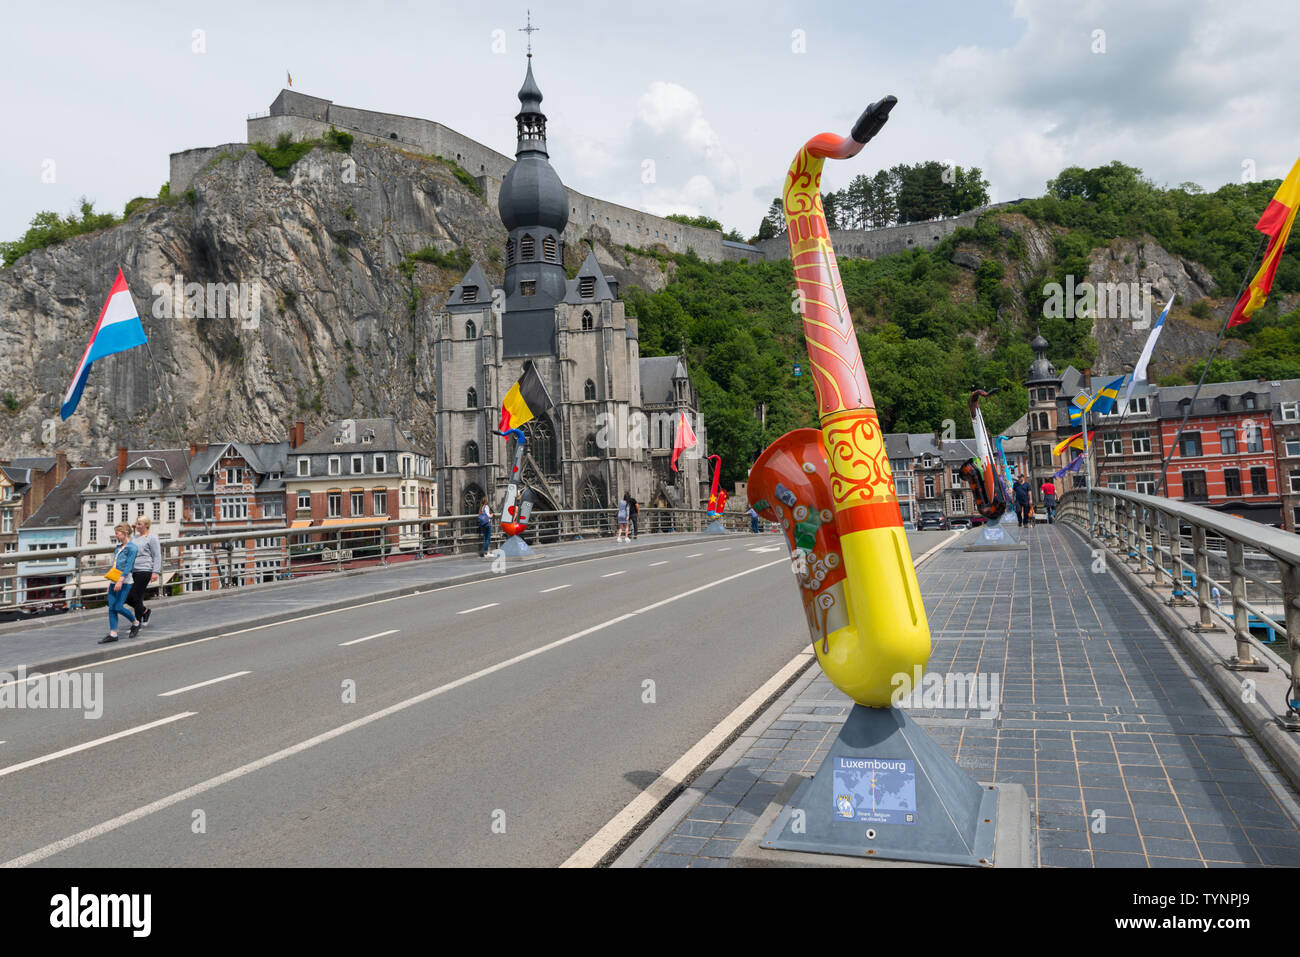 Saxophone statue (Luxembourg) on the Charles de Gaulle bridge in the Belgian city of Dinant Stock Photo